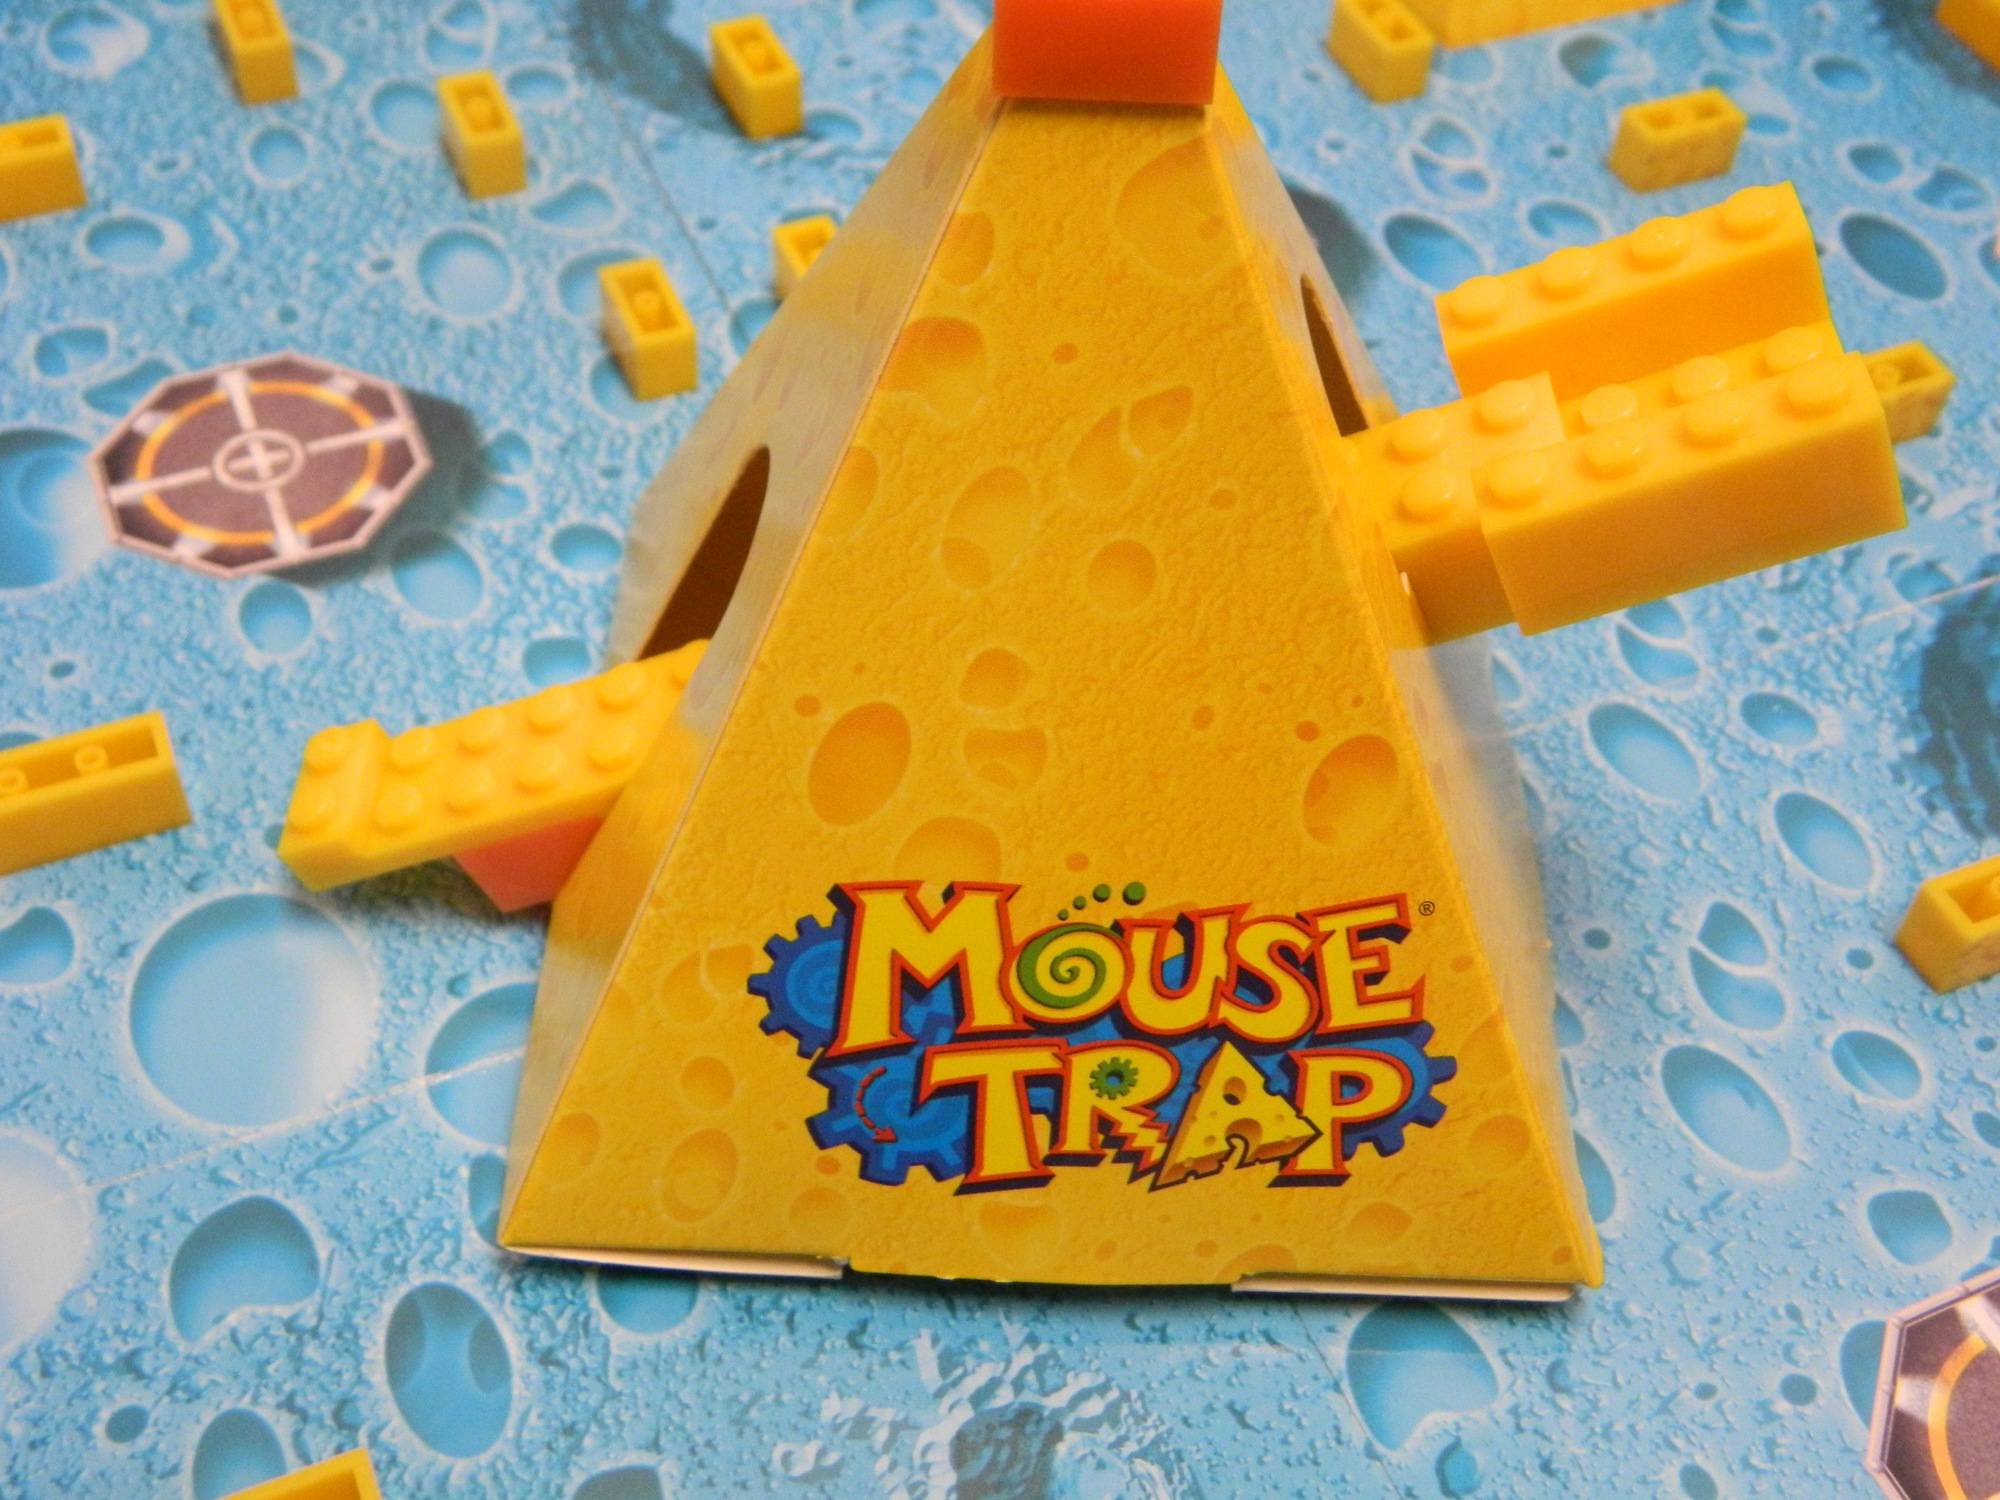 MOUSE TRAP CHEESE 50 PIECES Replacement GAME PARTS mousetrap 